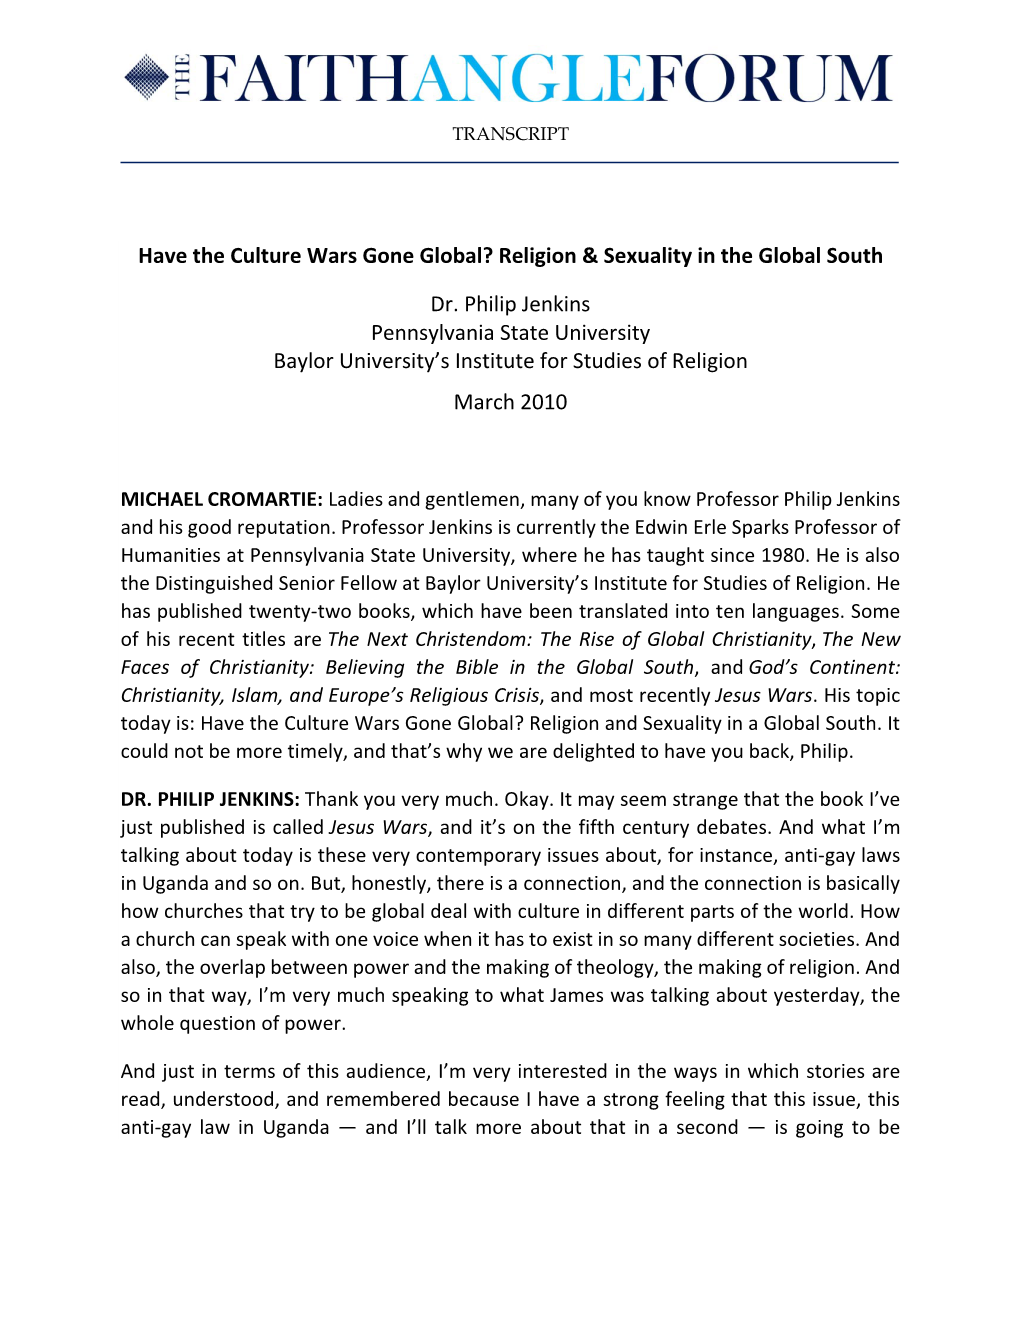 Have the Culture Wars Gone Global? Religion & Sexuality in the Global South